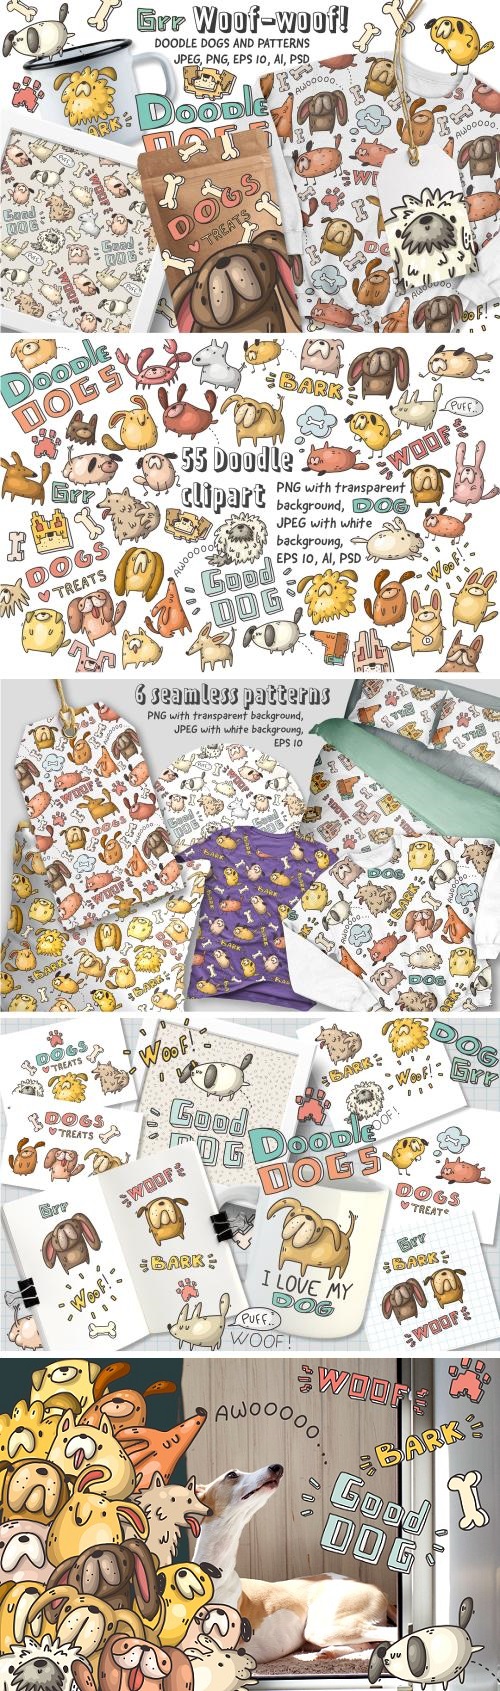 Set of funny dogs and patterns - 2319311